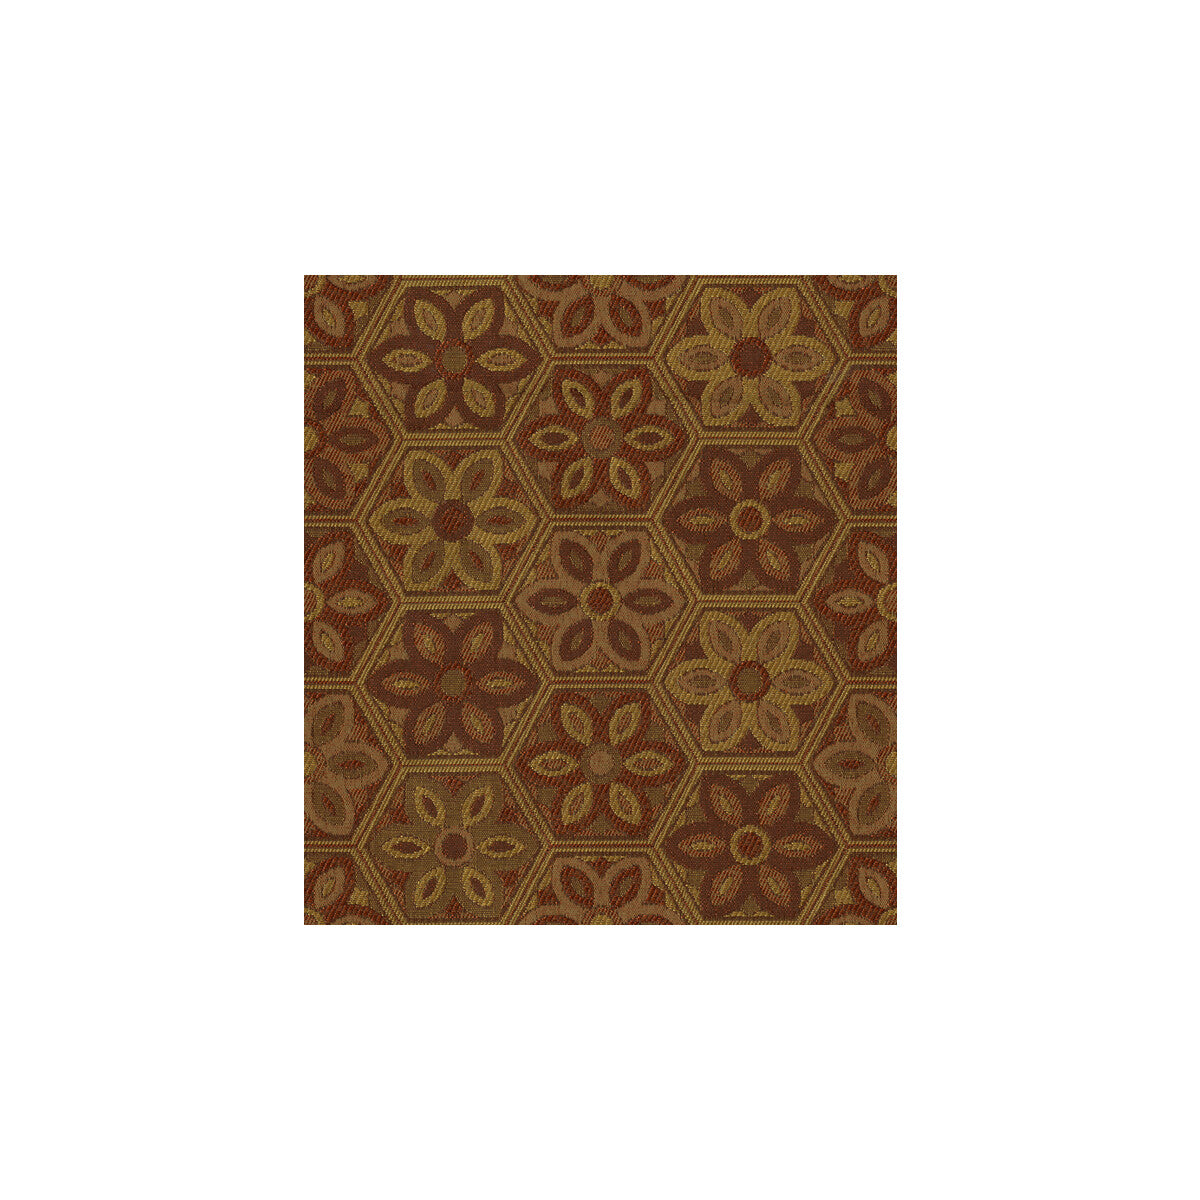 Madiera fabric in mesa color - pattern 32247.912.0 - by Kravet Contract